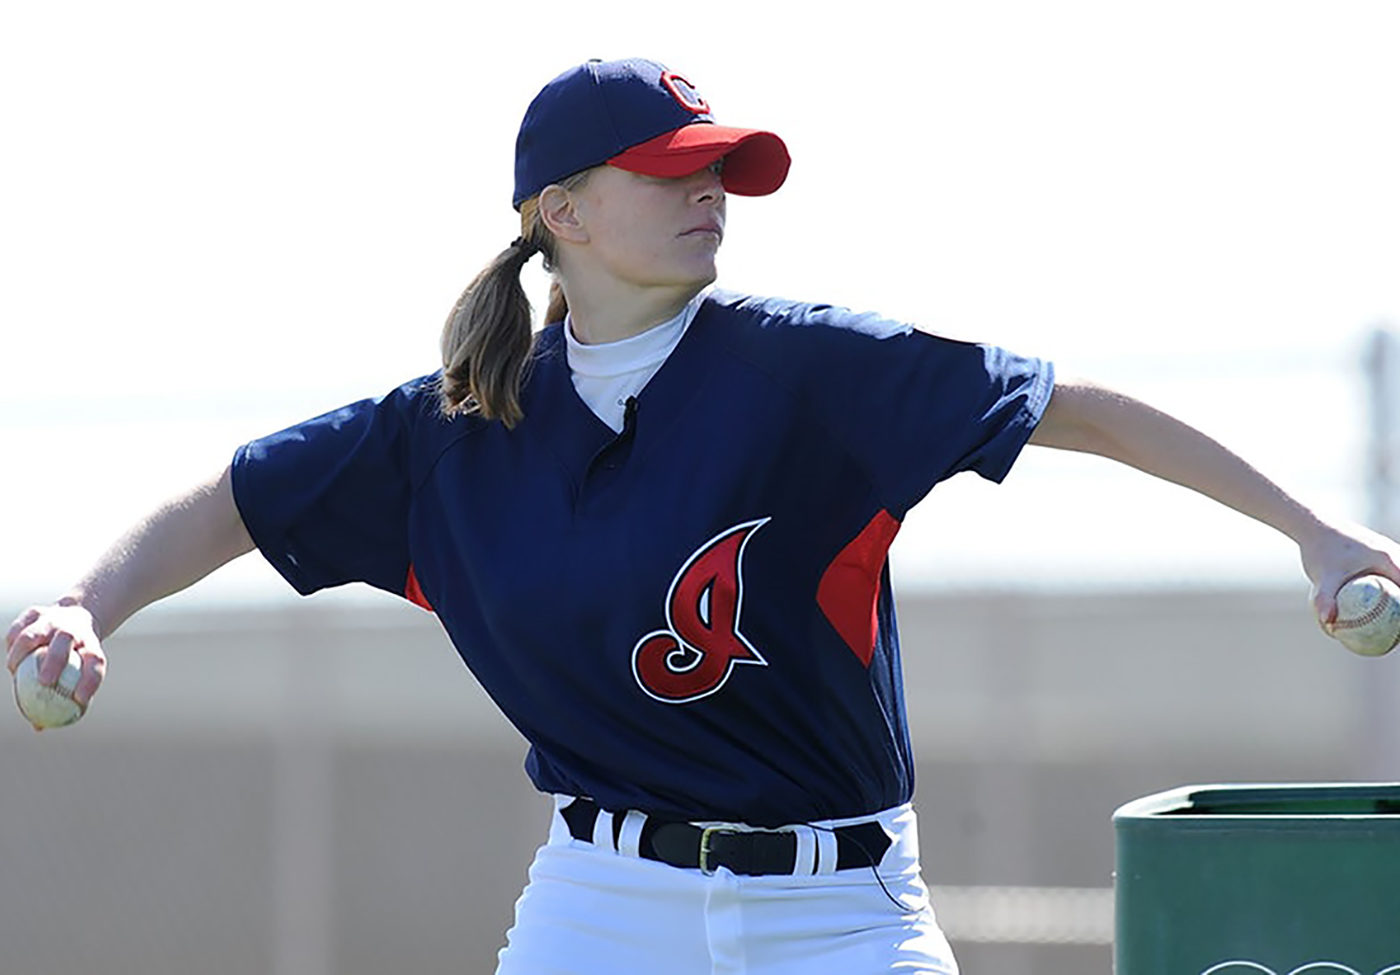 Photo of Justine Siegal pitching, courtesy of Justine Siegal.